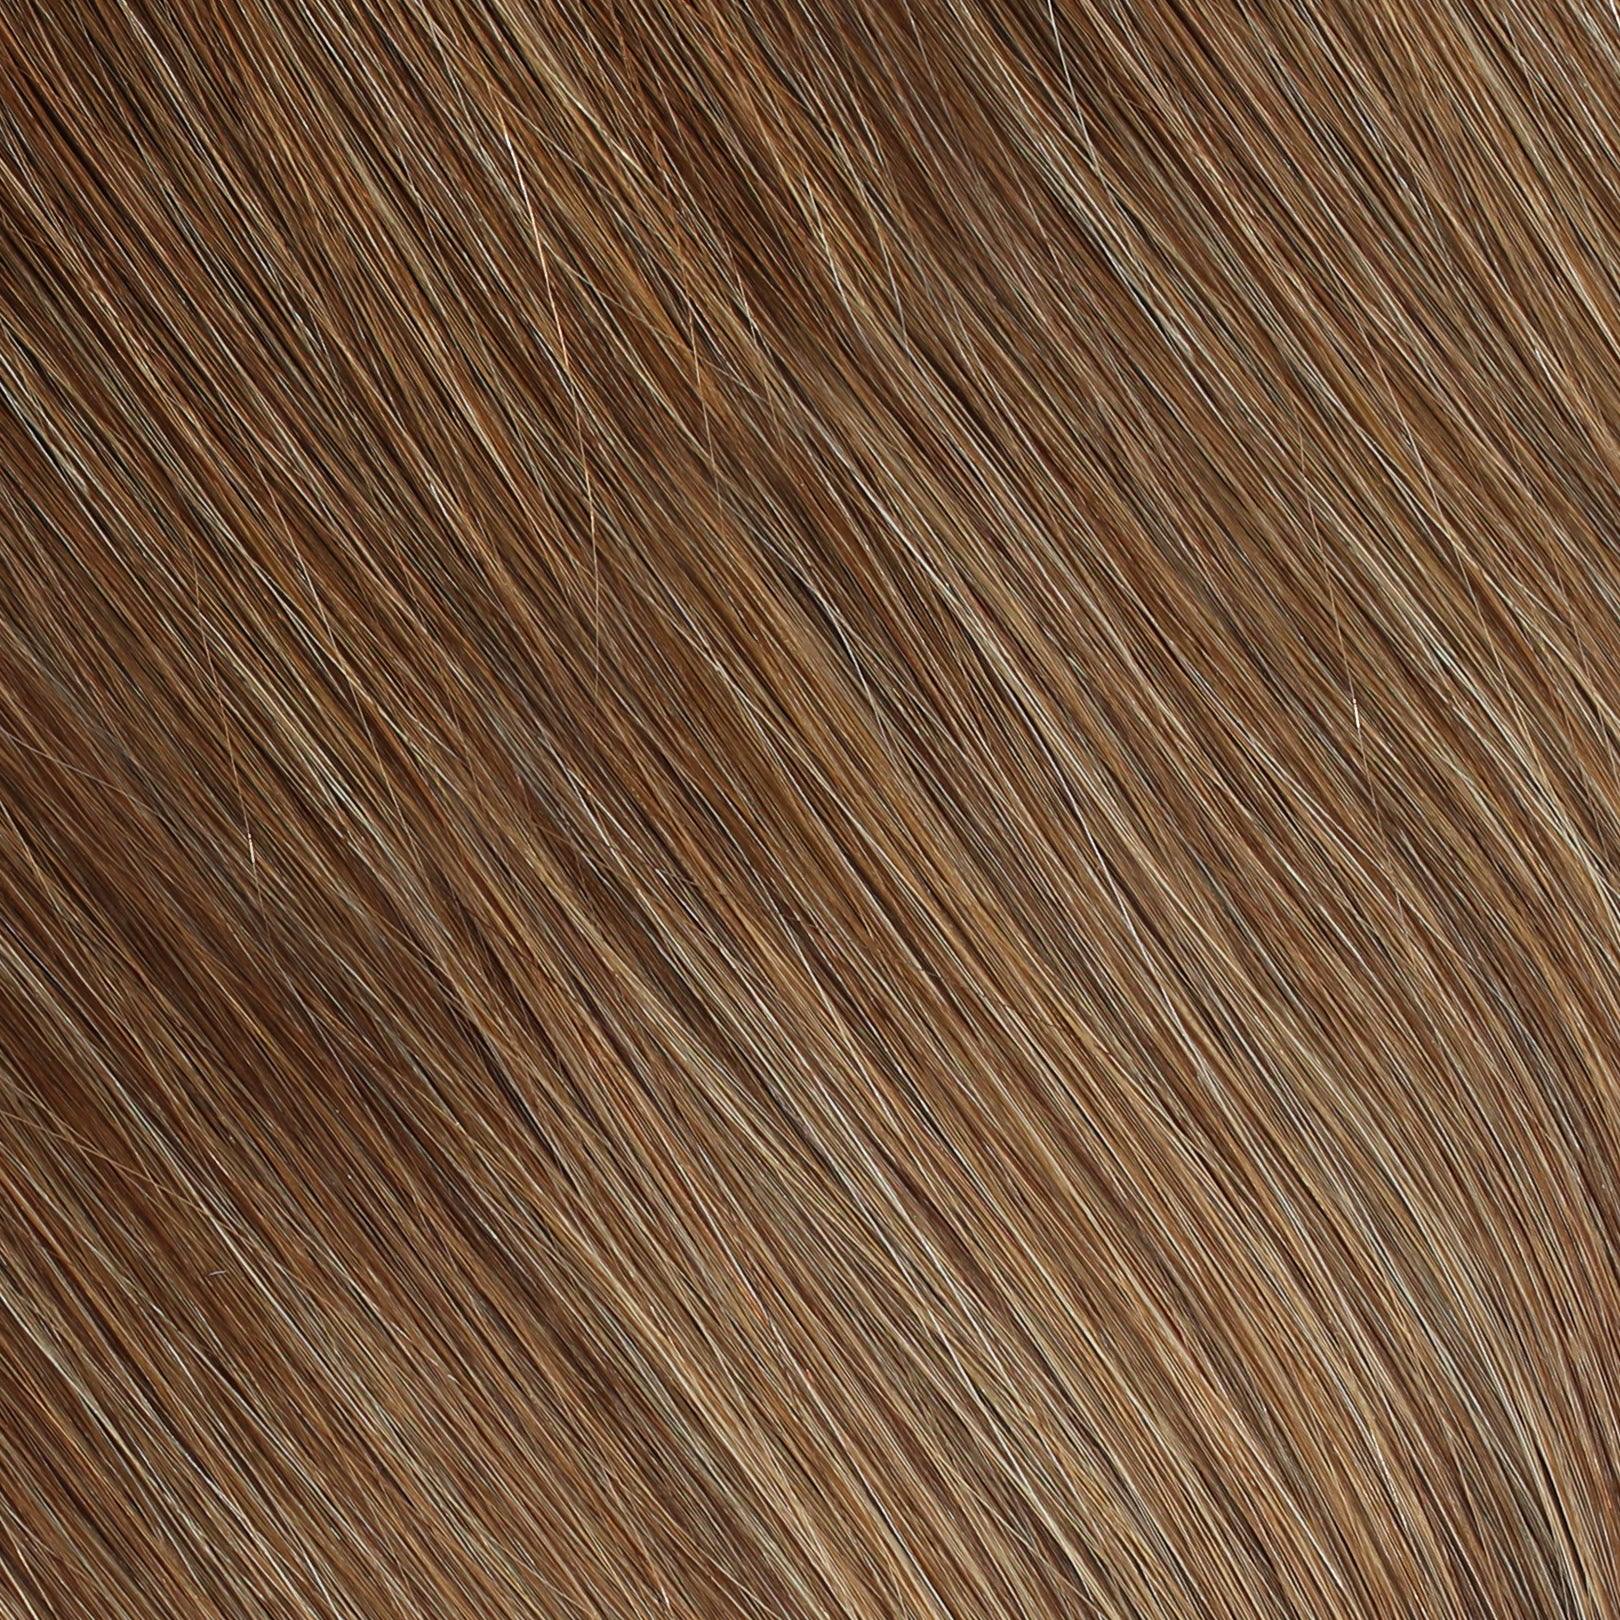 Hair Texture Swatches (20 colors) - Photography and Web Design - Los Angeles, US based Shopify Experts Revo Designs